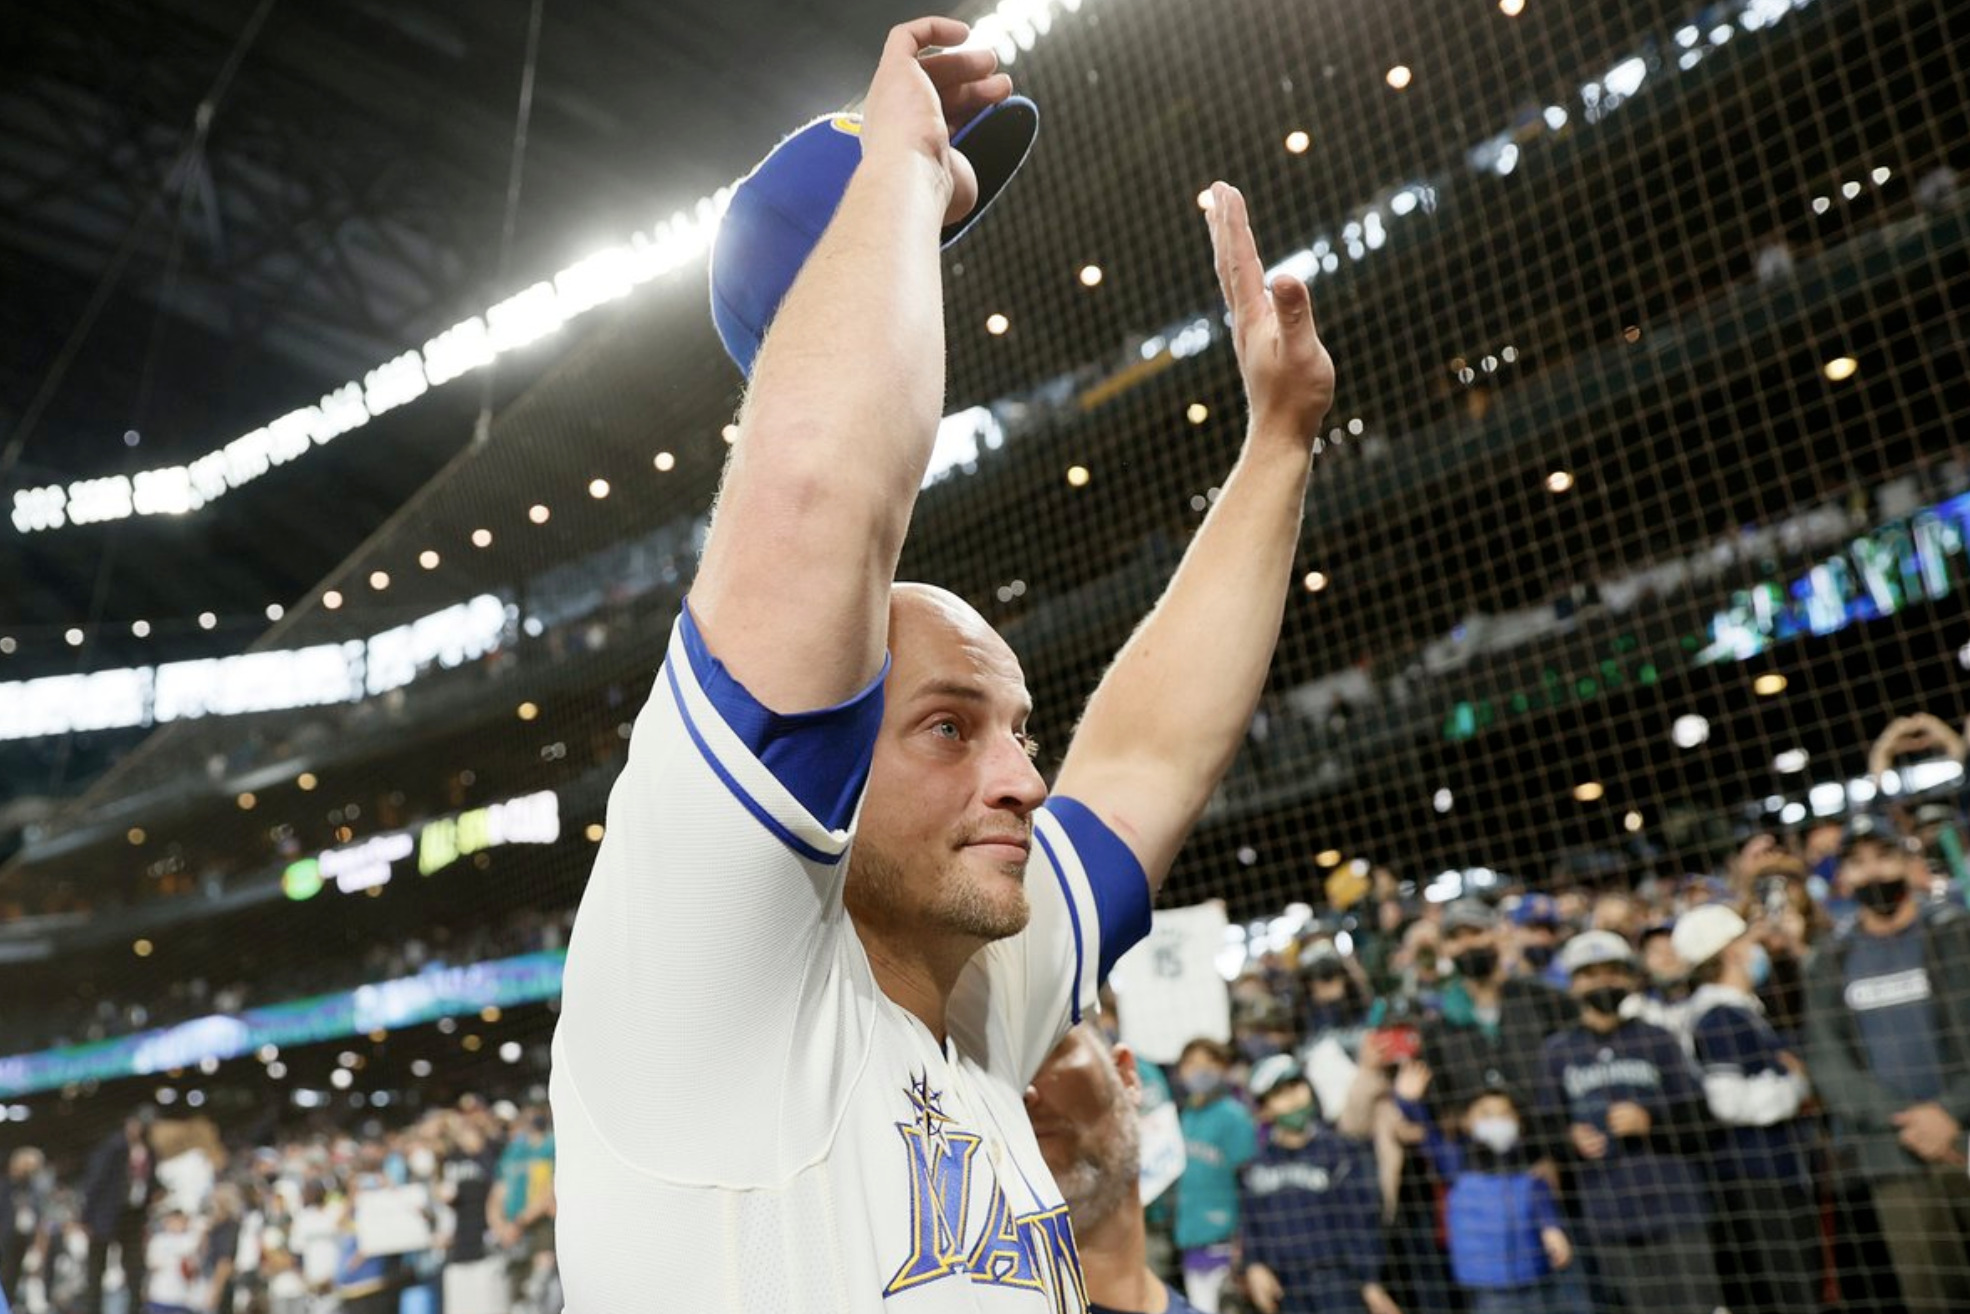 Let's make some Kyle Seager trades - Lookout Landing